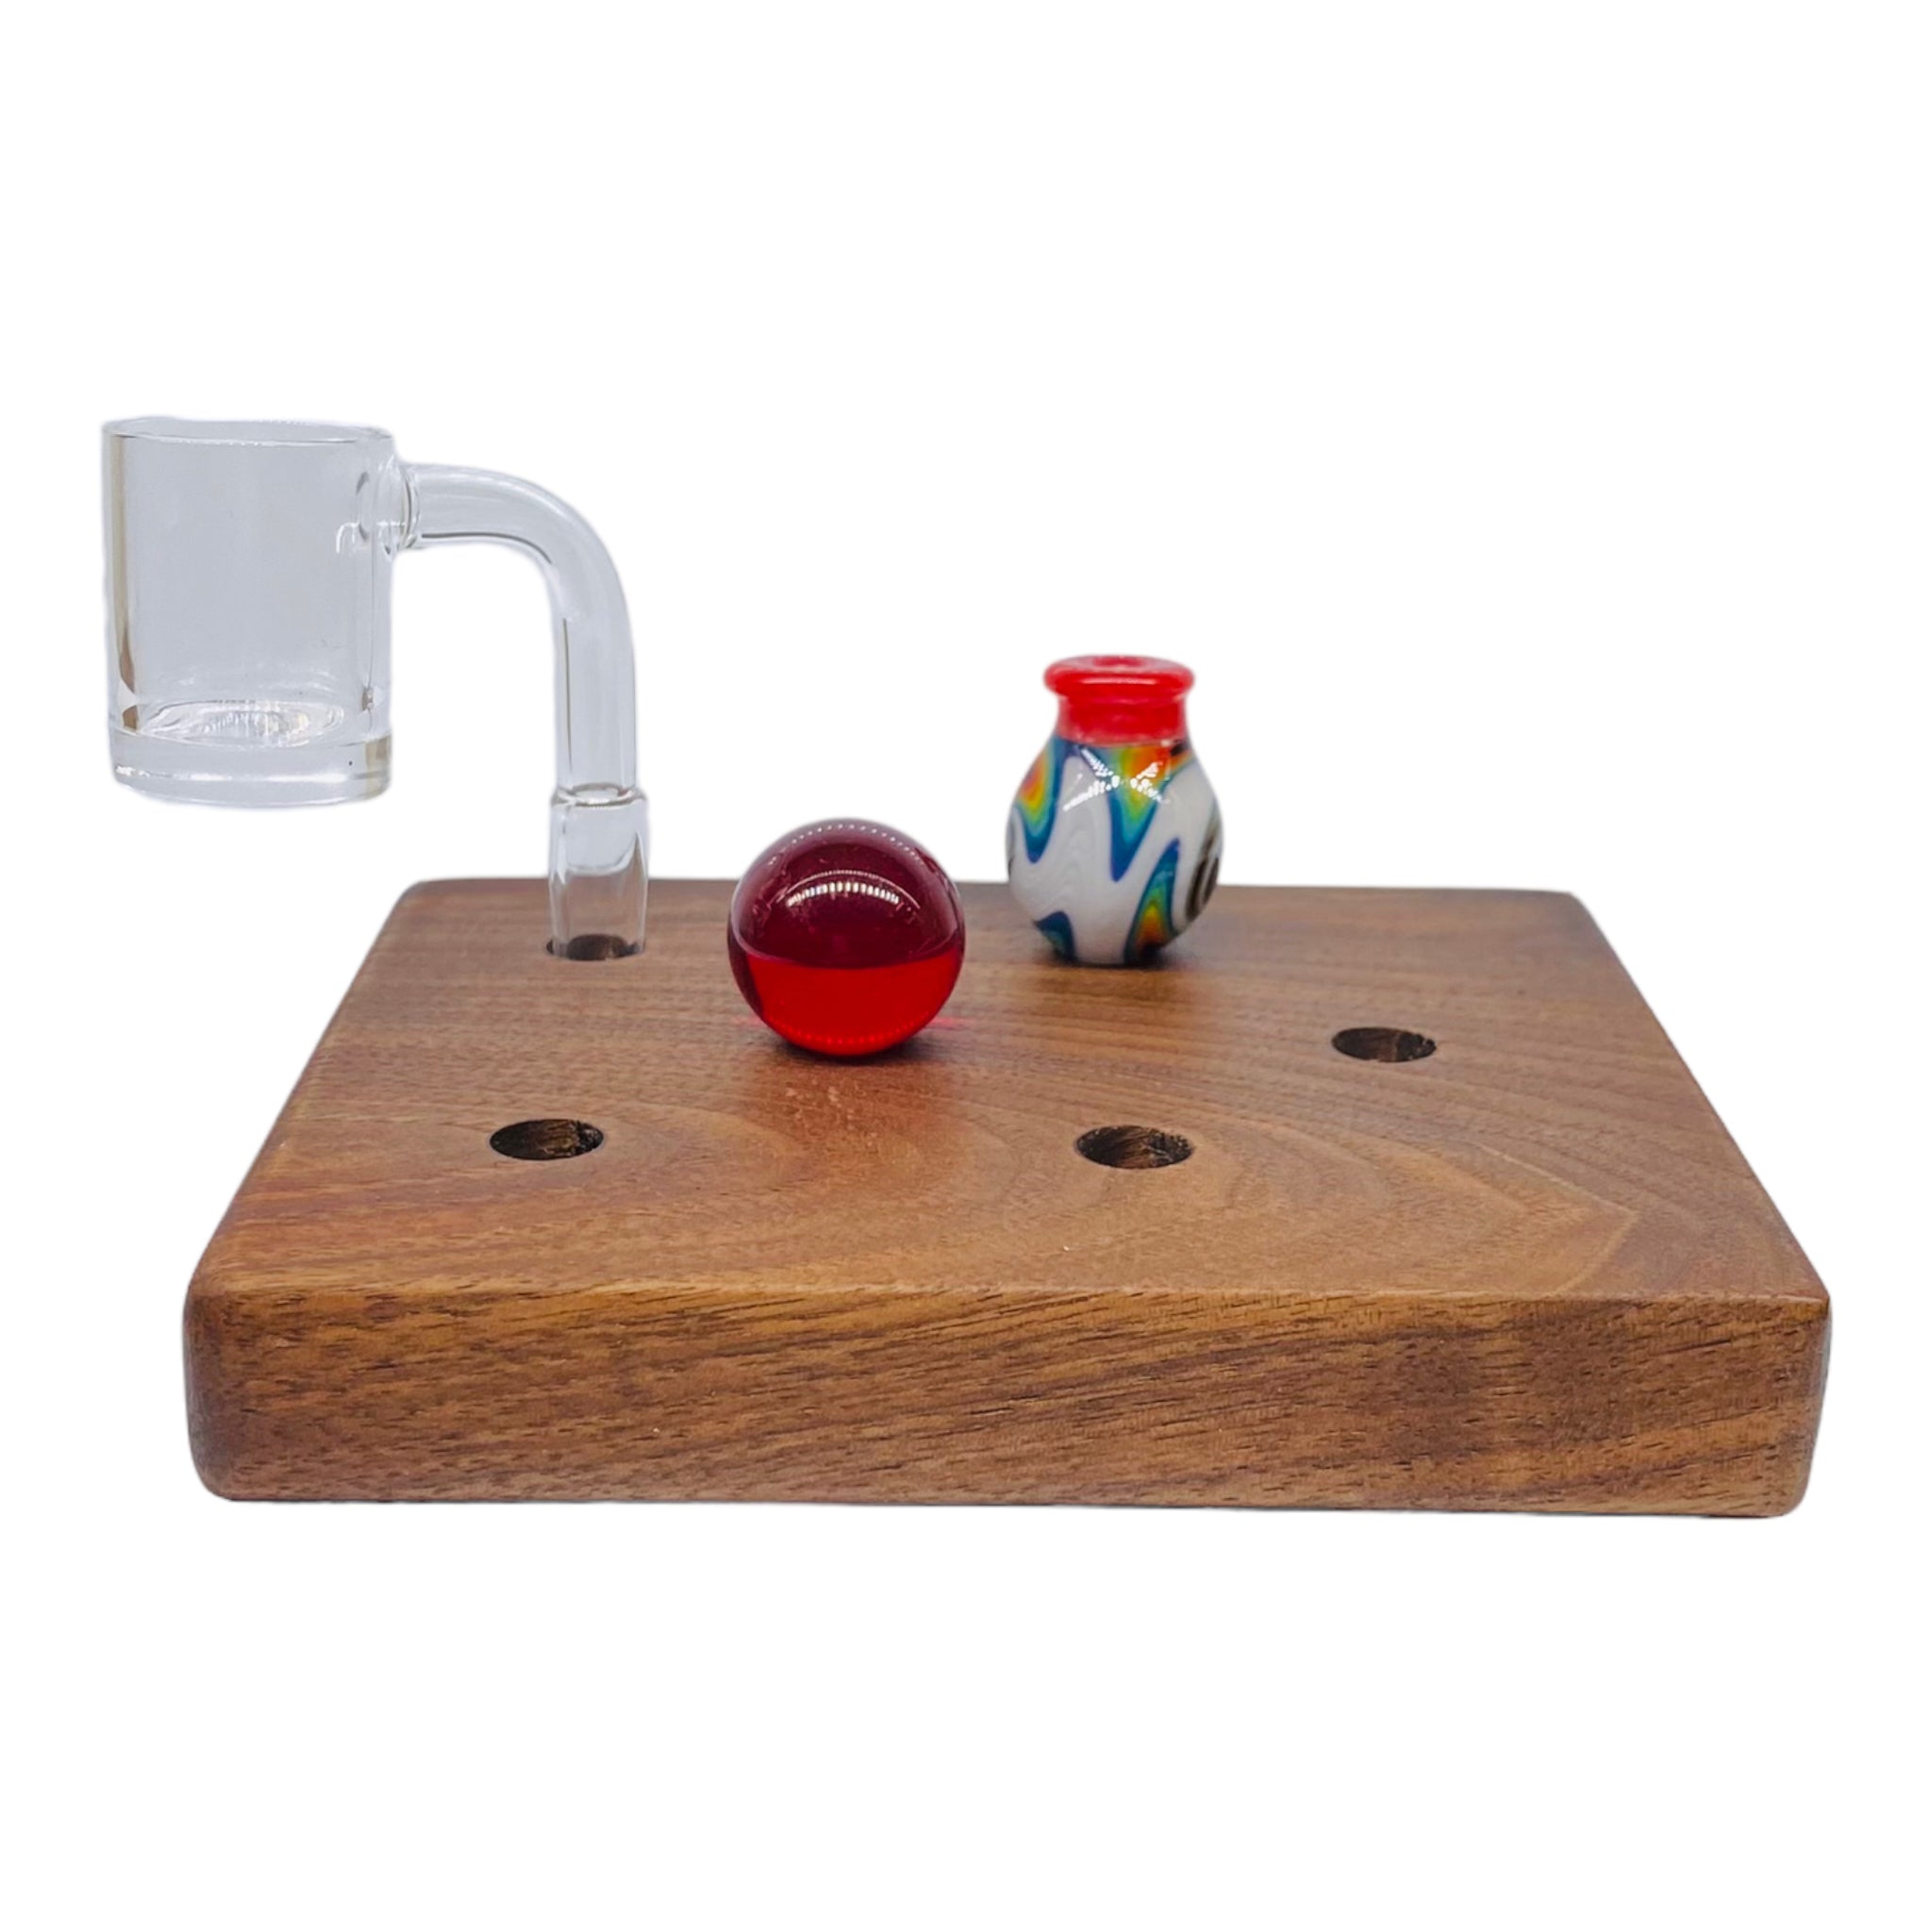 6 Hole Wood Display Stand Holder For 10mm Bong Bowl Pieces Or Quartz Bangers - Black Walnut Perfect for displaying 10mm Bong Bowl Pieces, Quartz Bangers, Carb Caps, And Marbles.